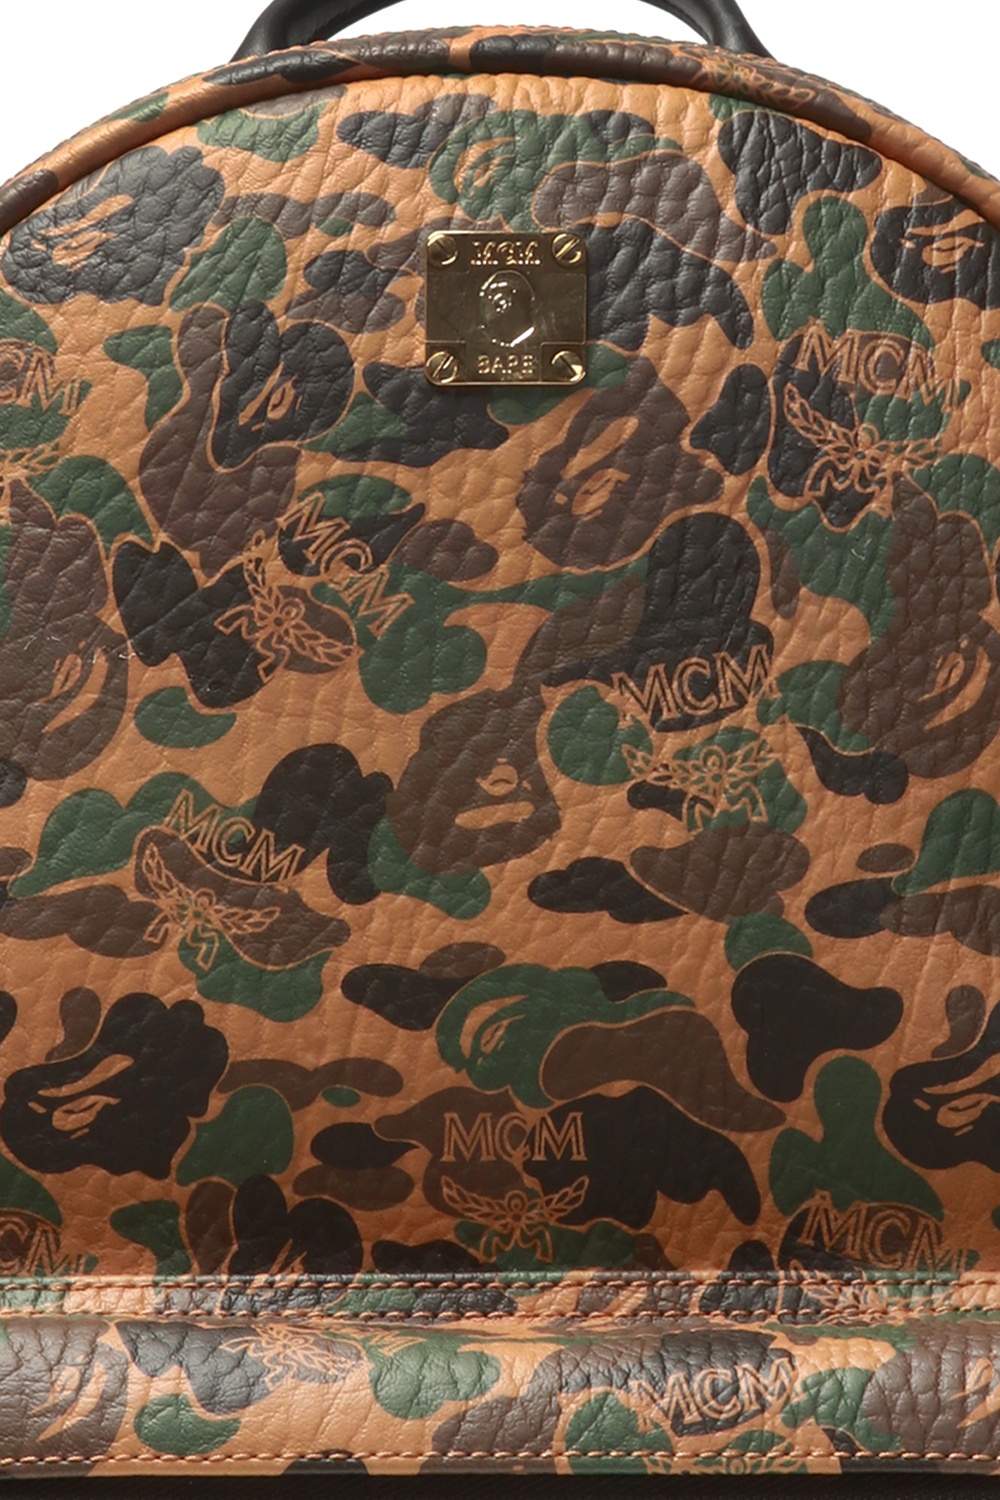 bape backpack limited edition